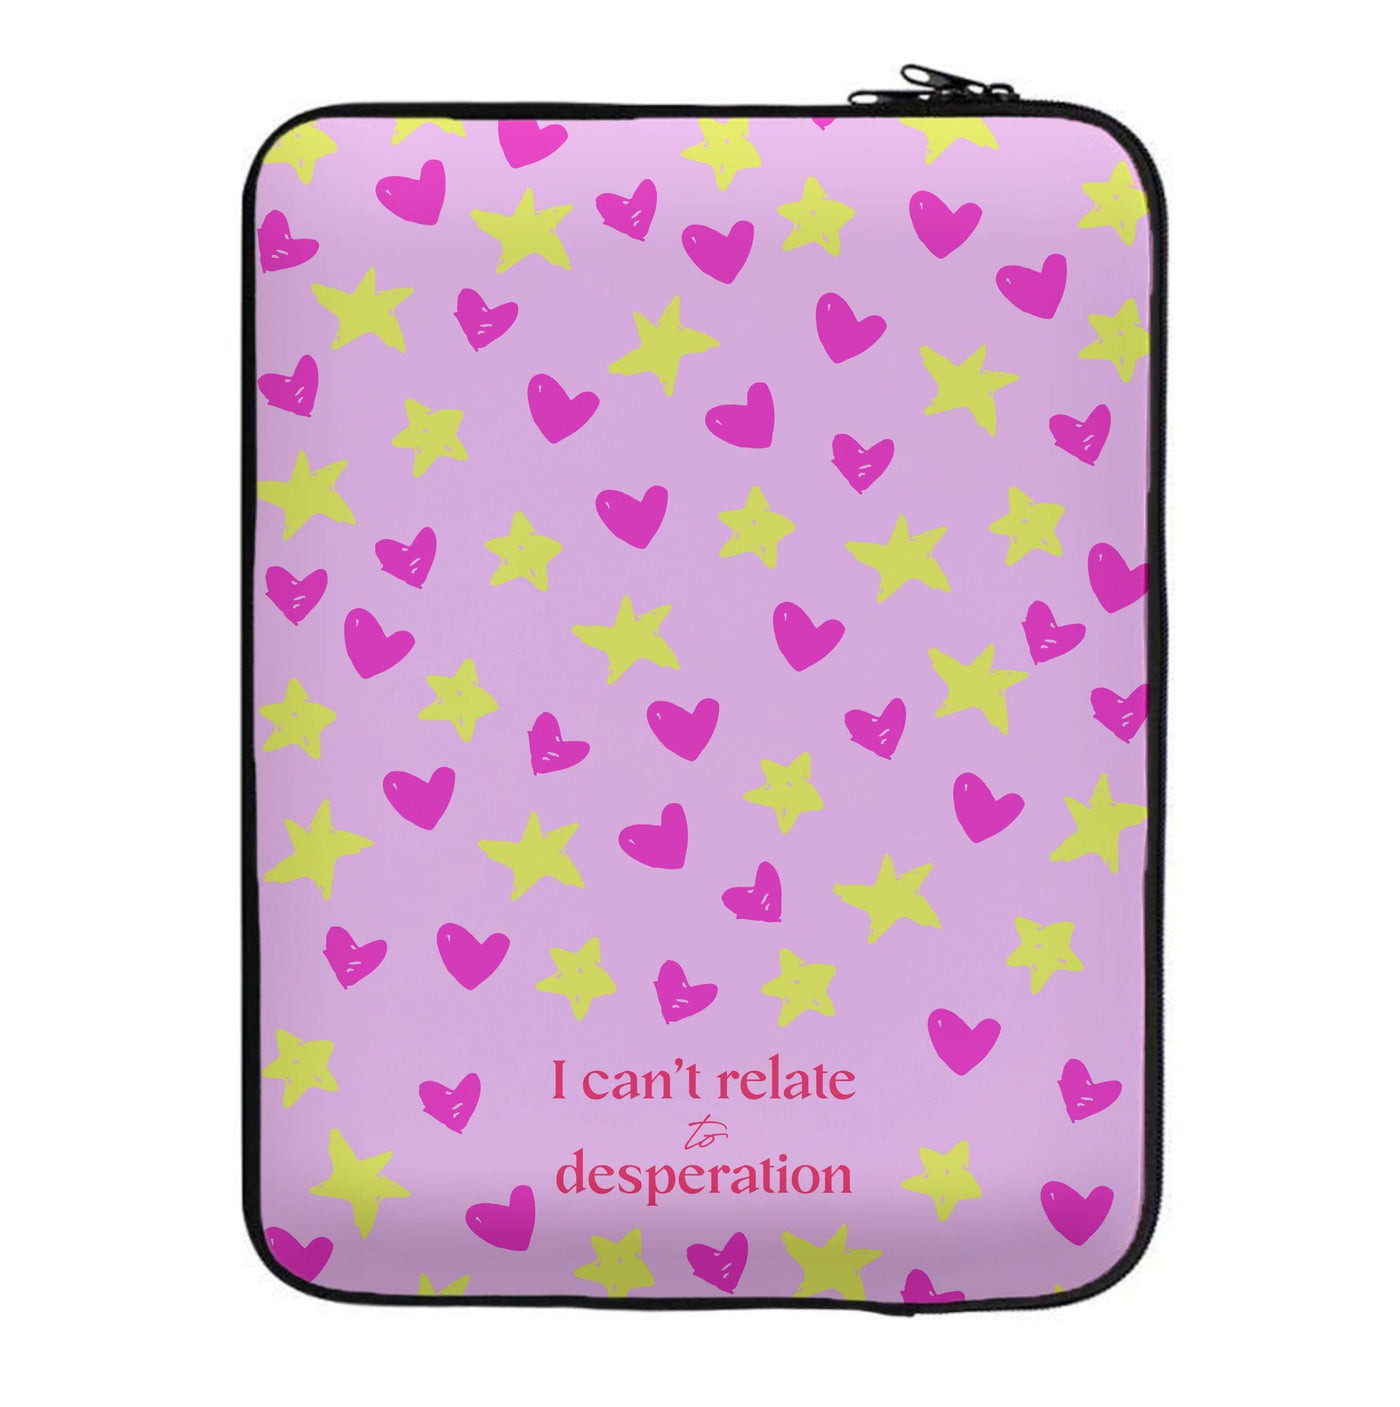 I Can't Relate To Desperation - Sabrina Carpenter Laptop Sleeve